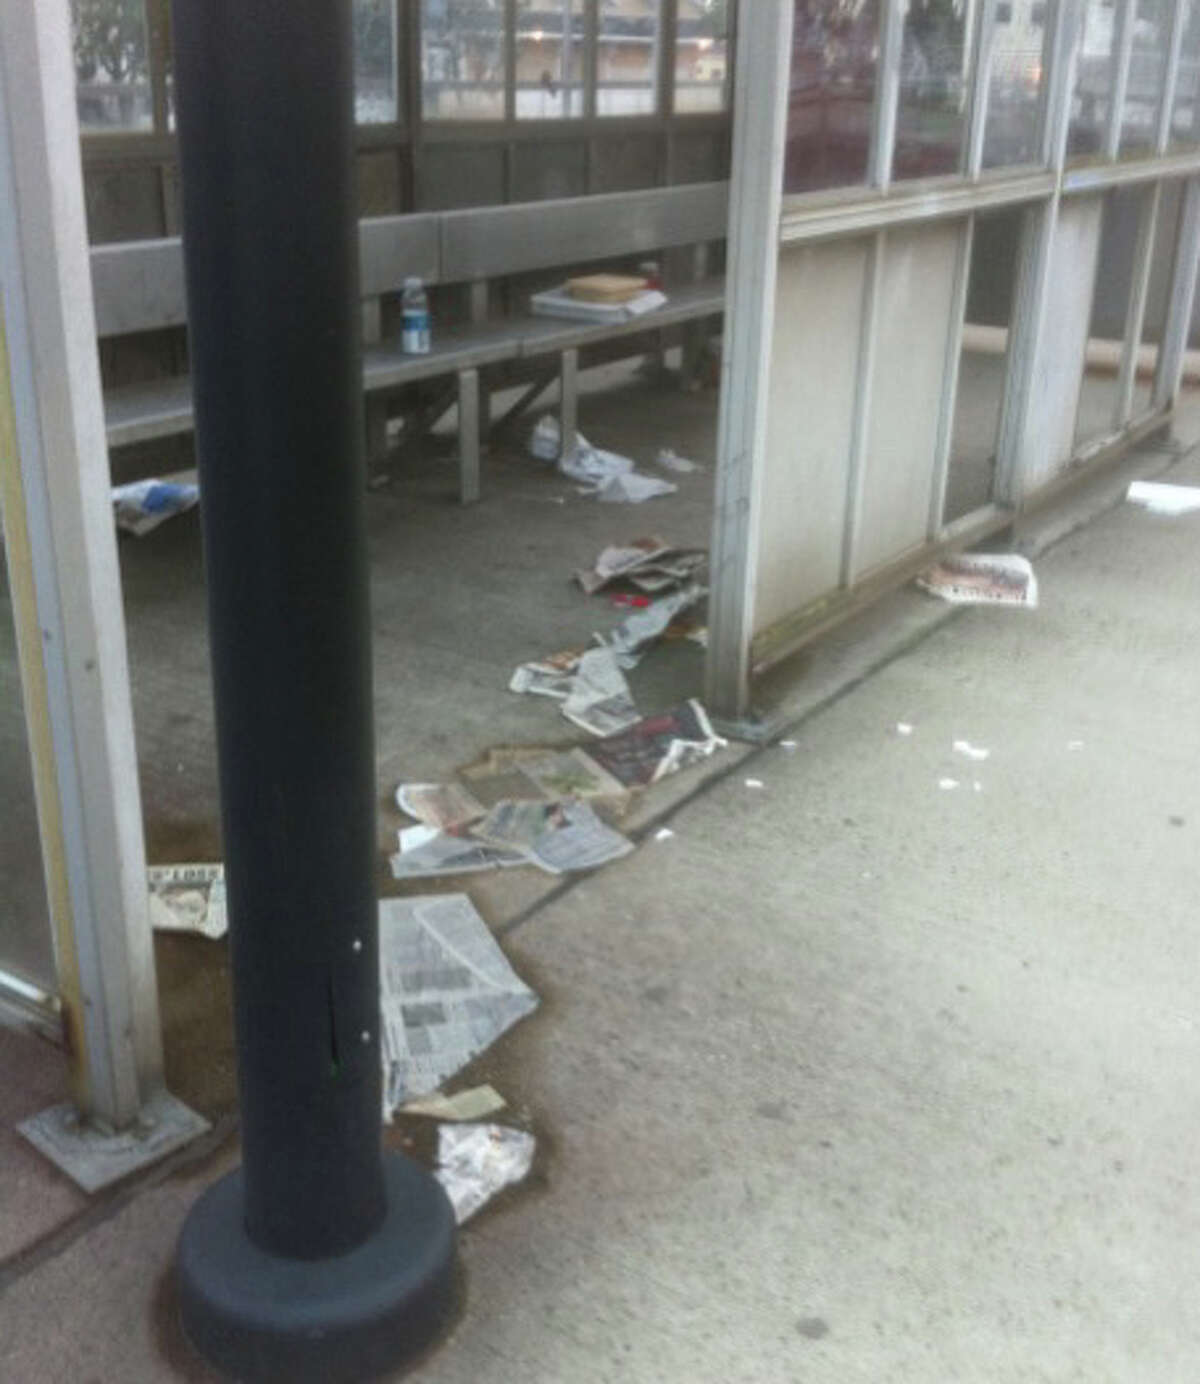 Litter is strewn around the passenger shelter on the eastbound platform of the Fairfield Railroad Station on Monday night.